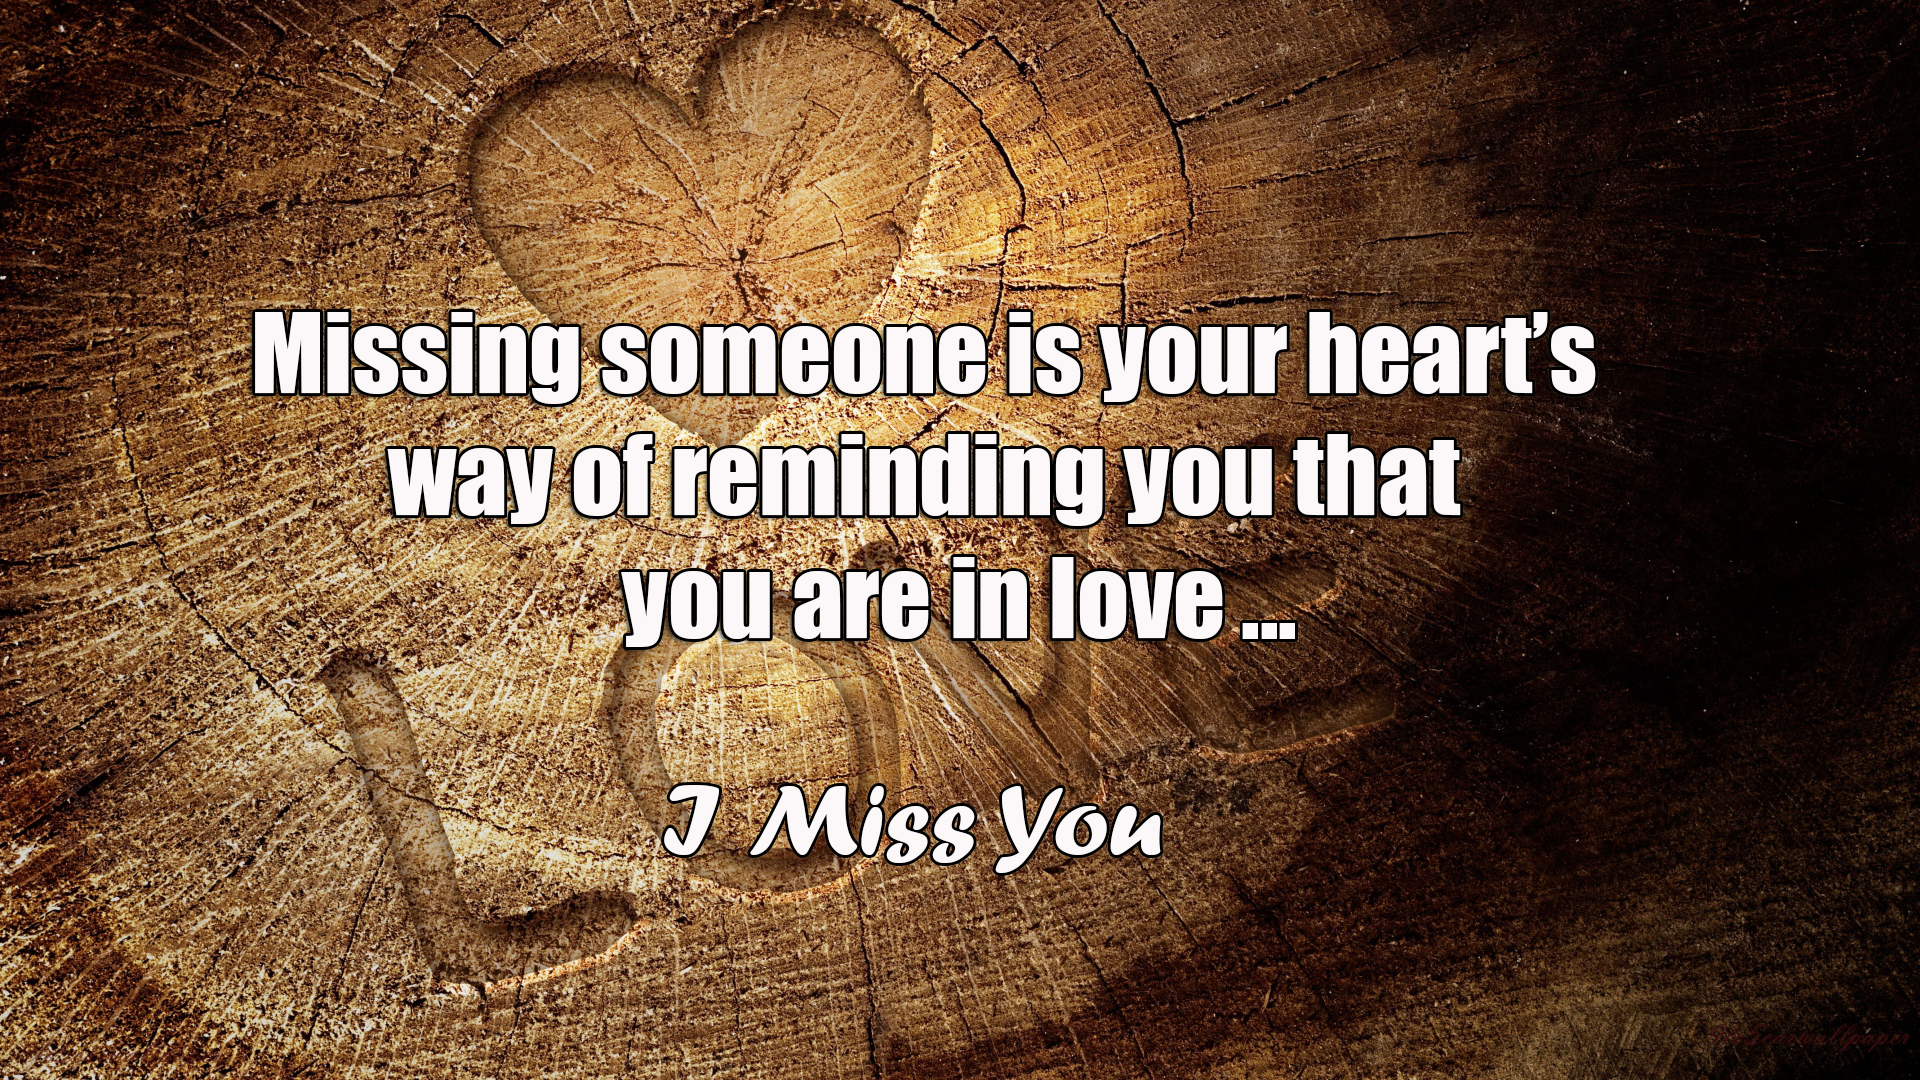 I-miss-you-images-quotes-wallpaers-cards-posters-wishes-2018